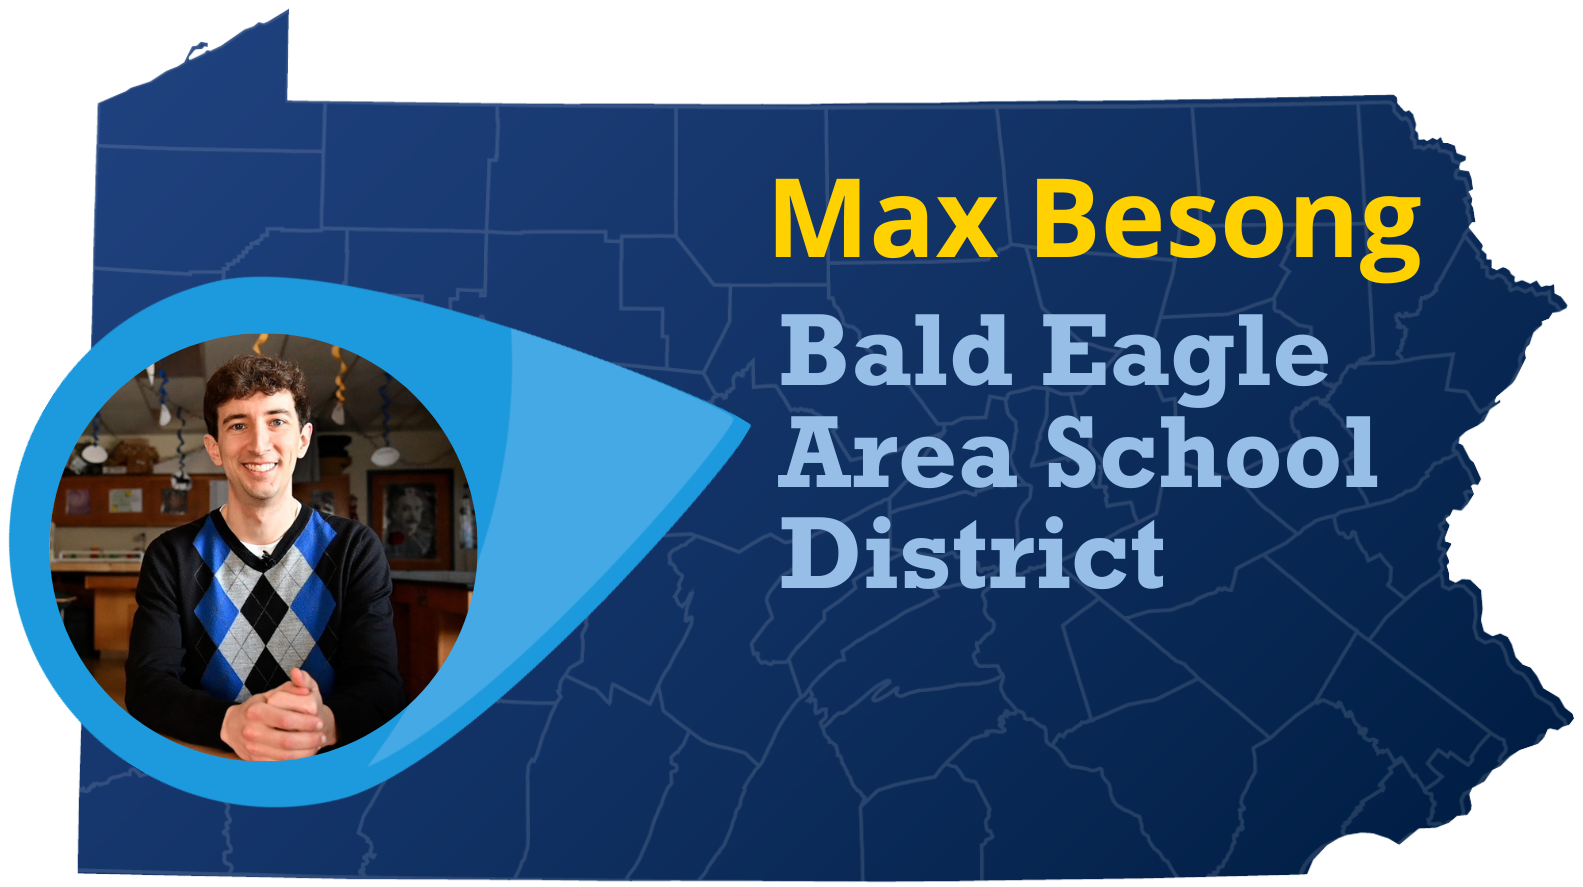 Max Besong Bald Eagle Area School District